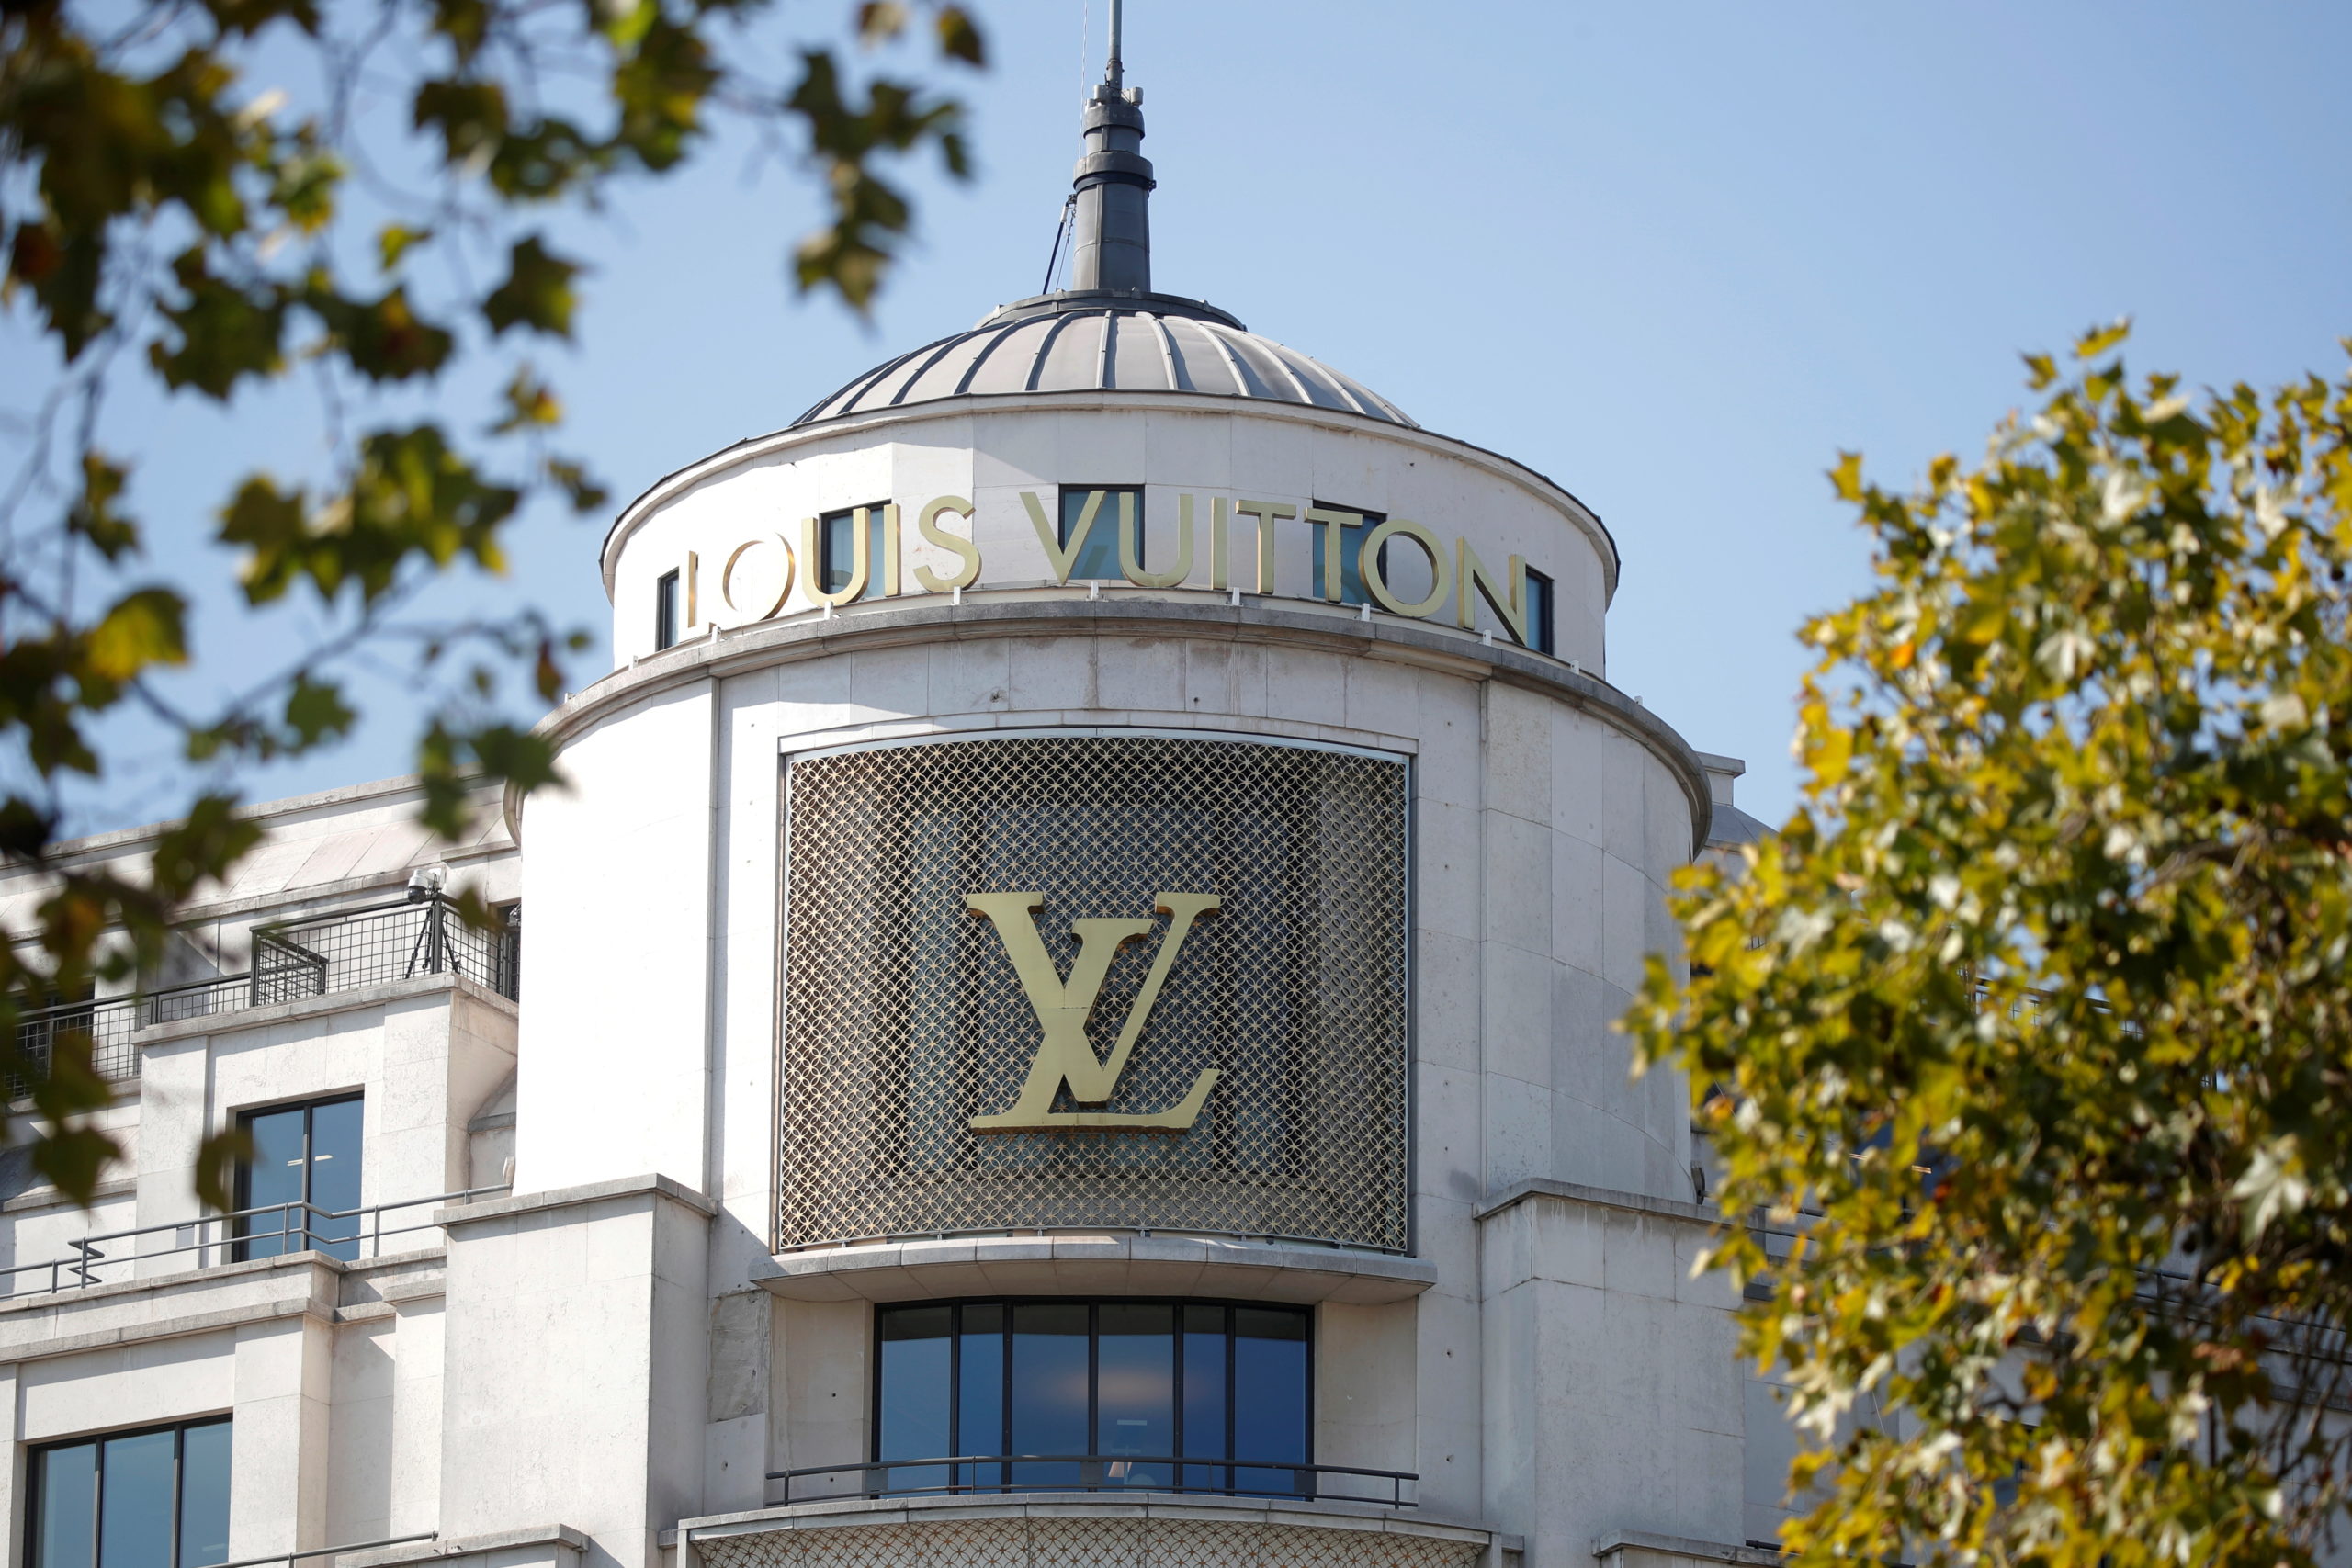 GLOBAL ACTION AGAINST LVMH, APRIL 20TH - 30TH. At LVMH, the most